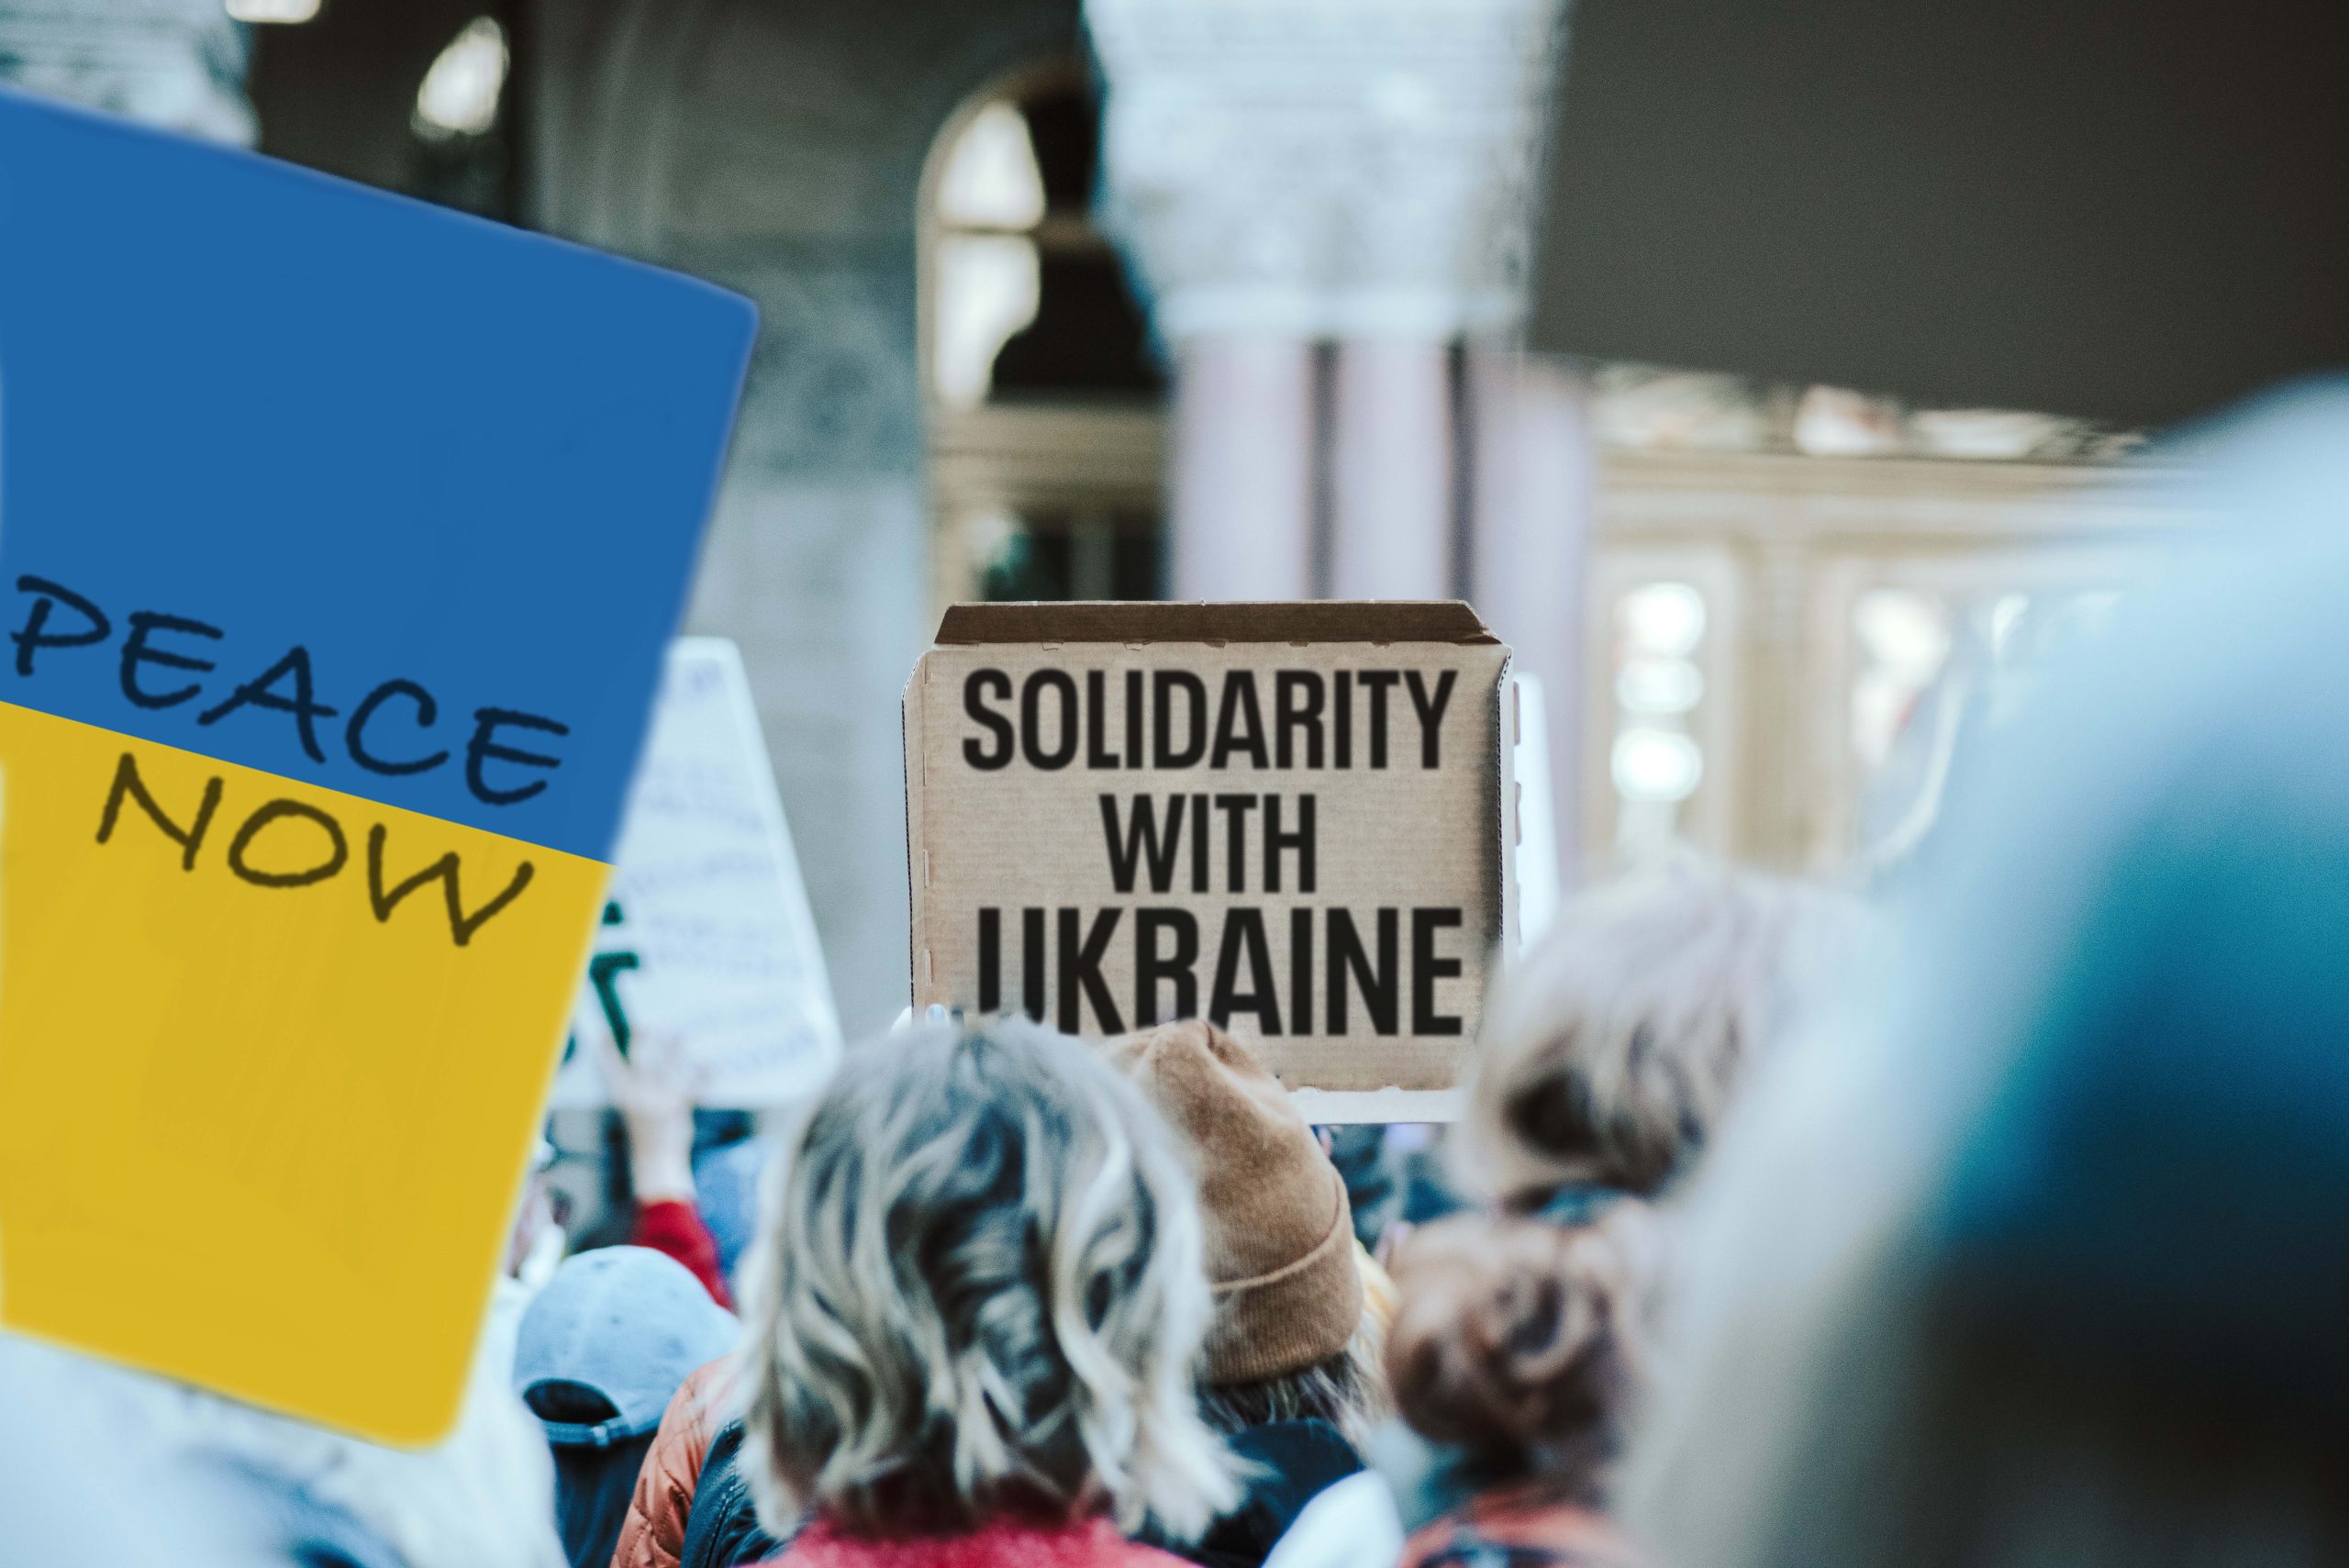 Protest poster in solidarity with Ukraine